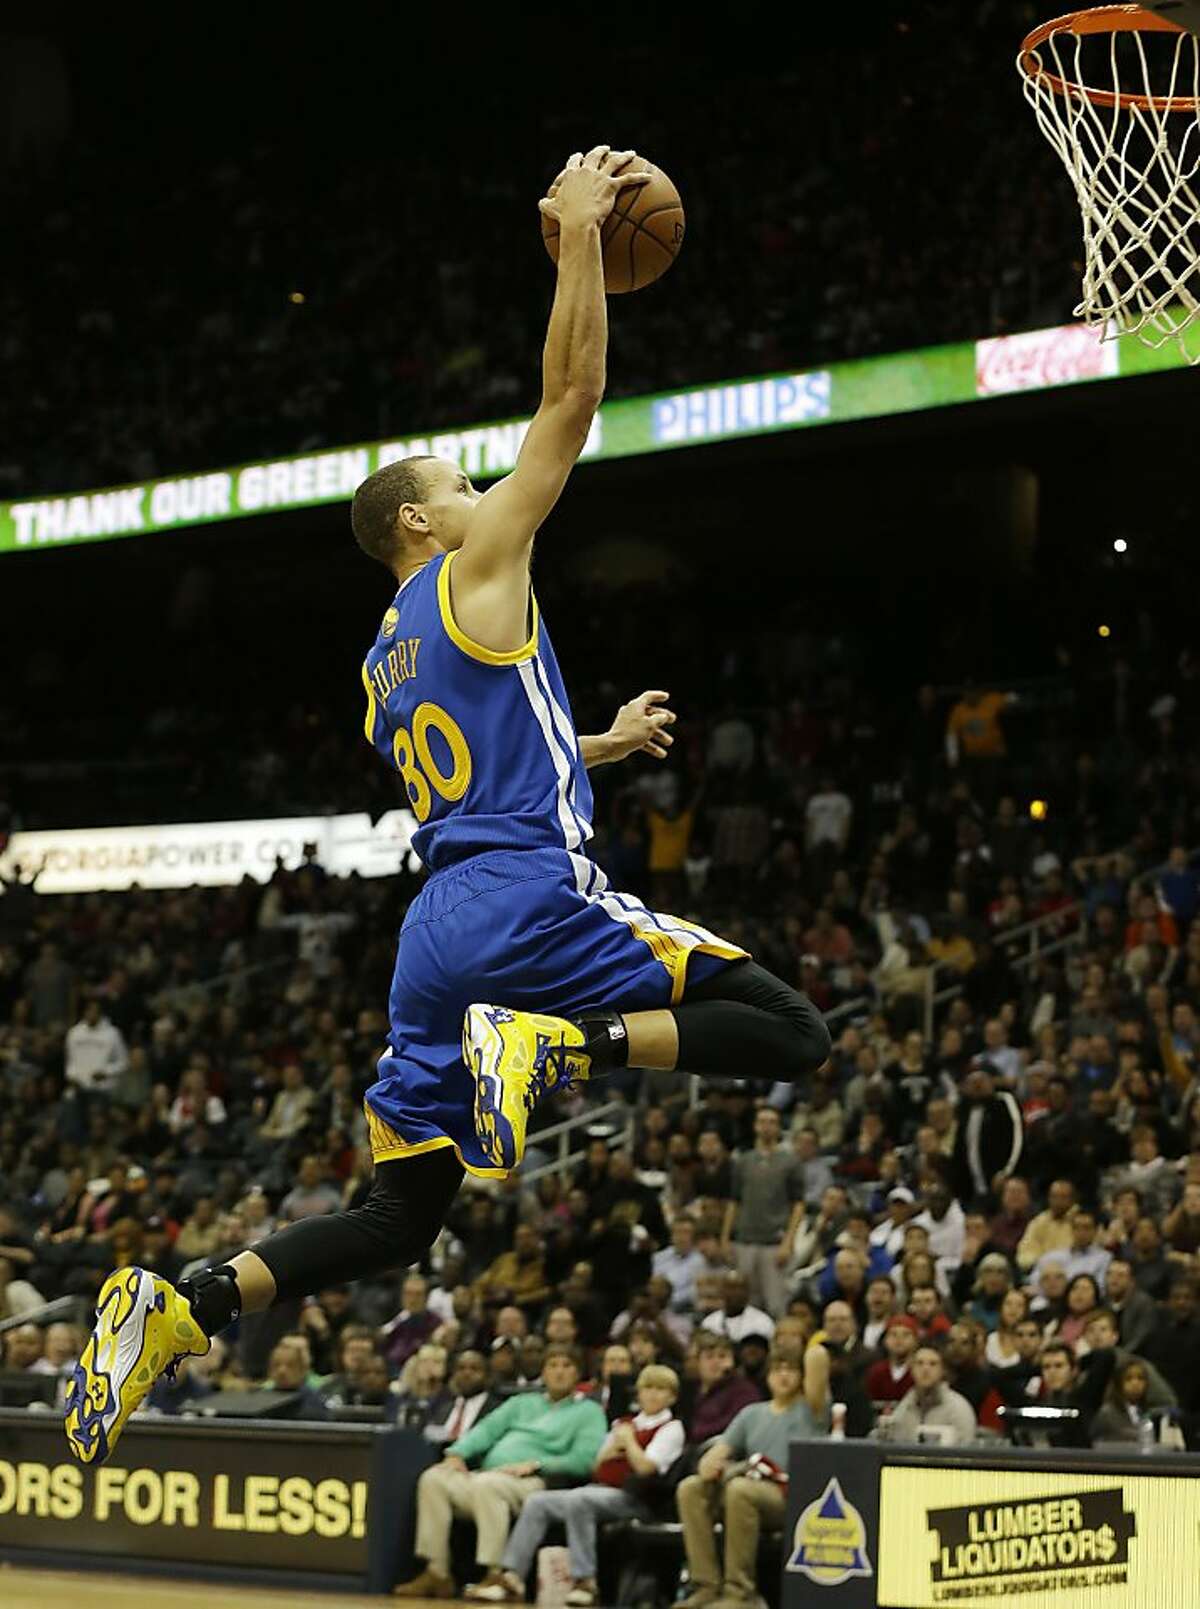 Golden State Warriors point guard Stephen Curry (30) scores against the Atlanta Hawks in the second half of an NBA basketball game on Friday, Jan. 3, 2014, in Atlanta. Golden State won 101-100. (AP Photo/John Bazemore)